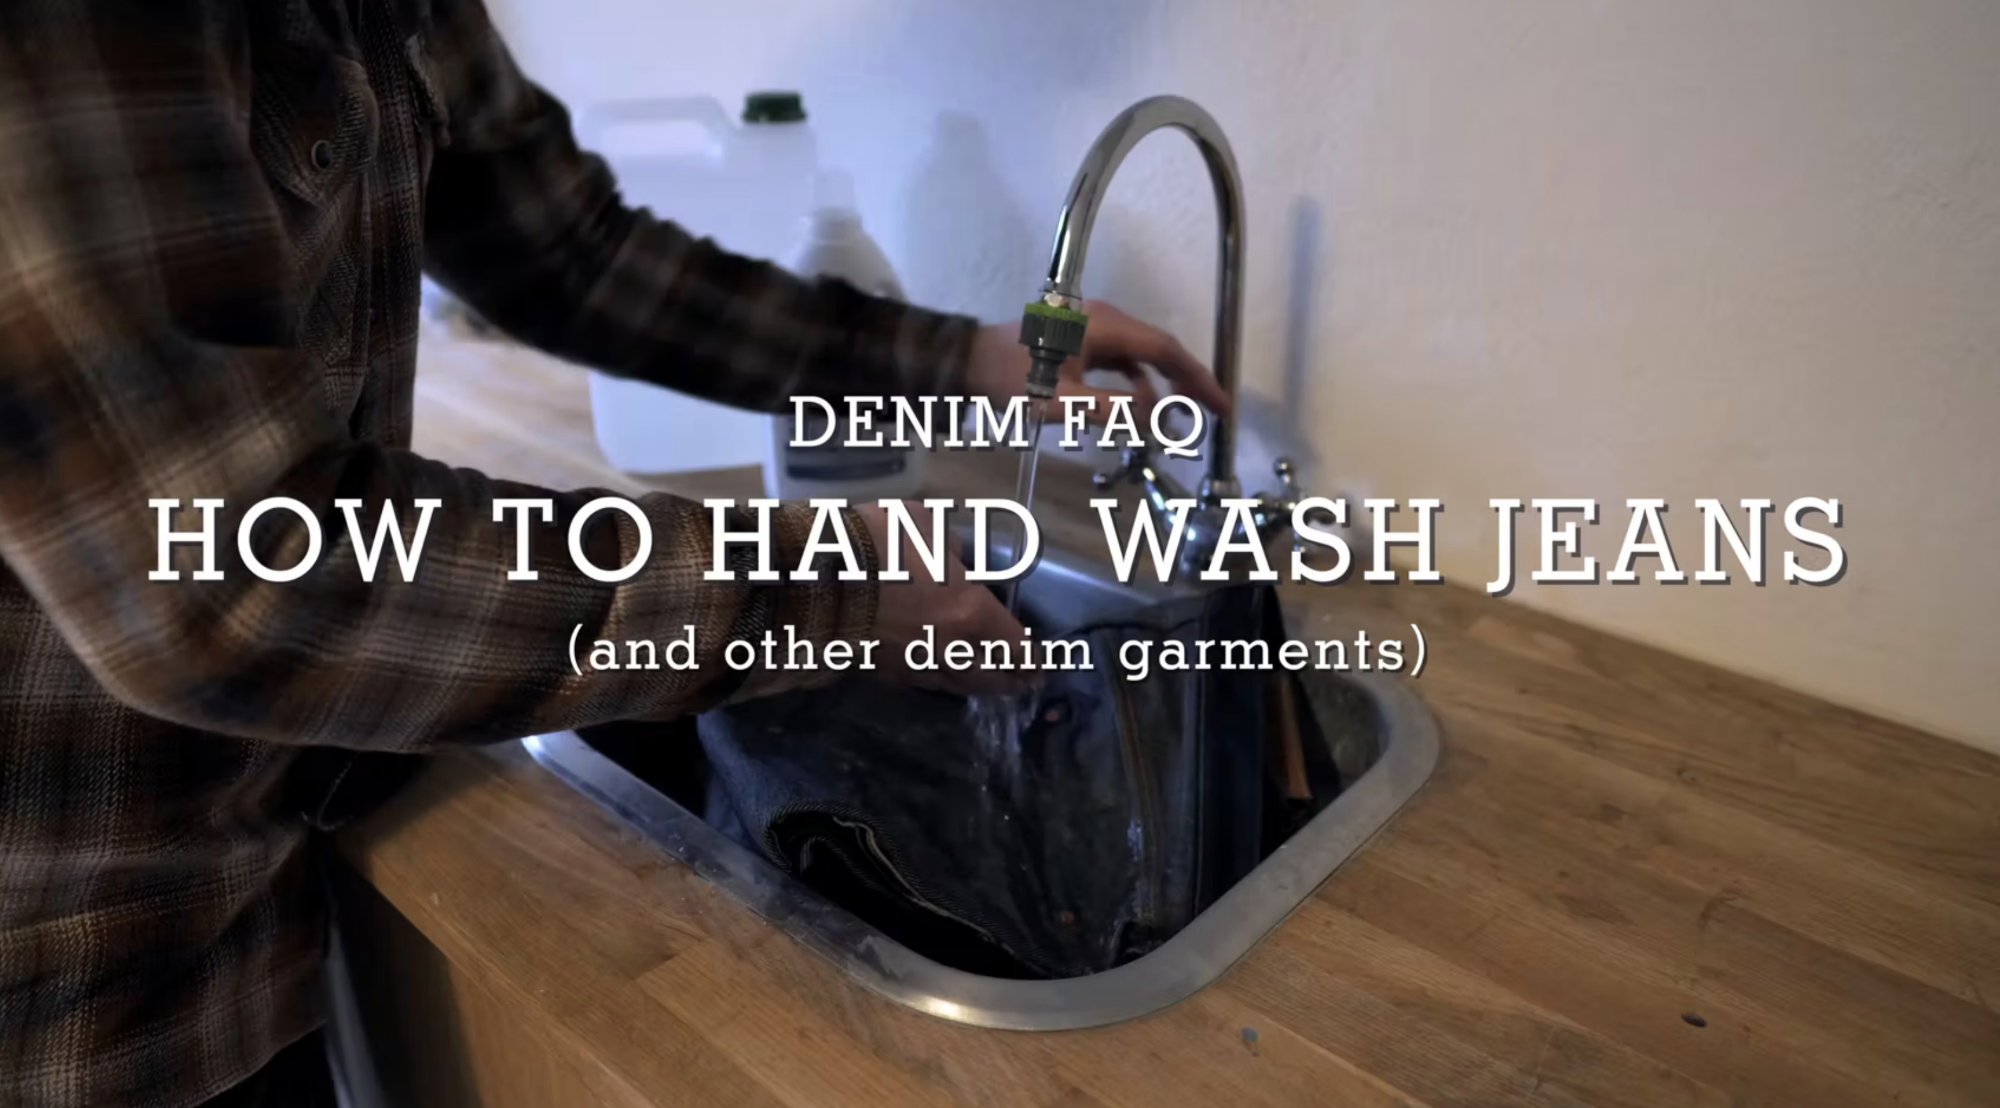 HOW TO HAND WASH JEANS